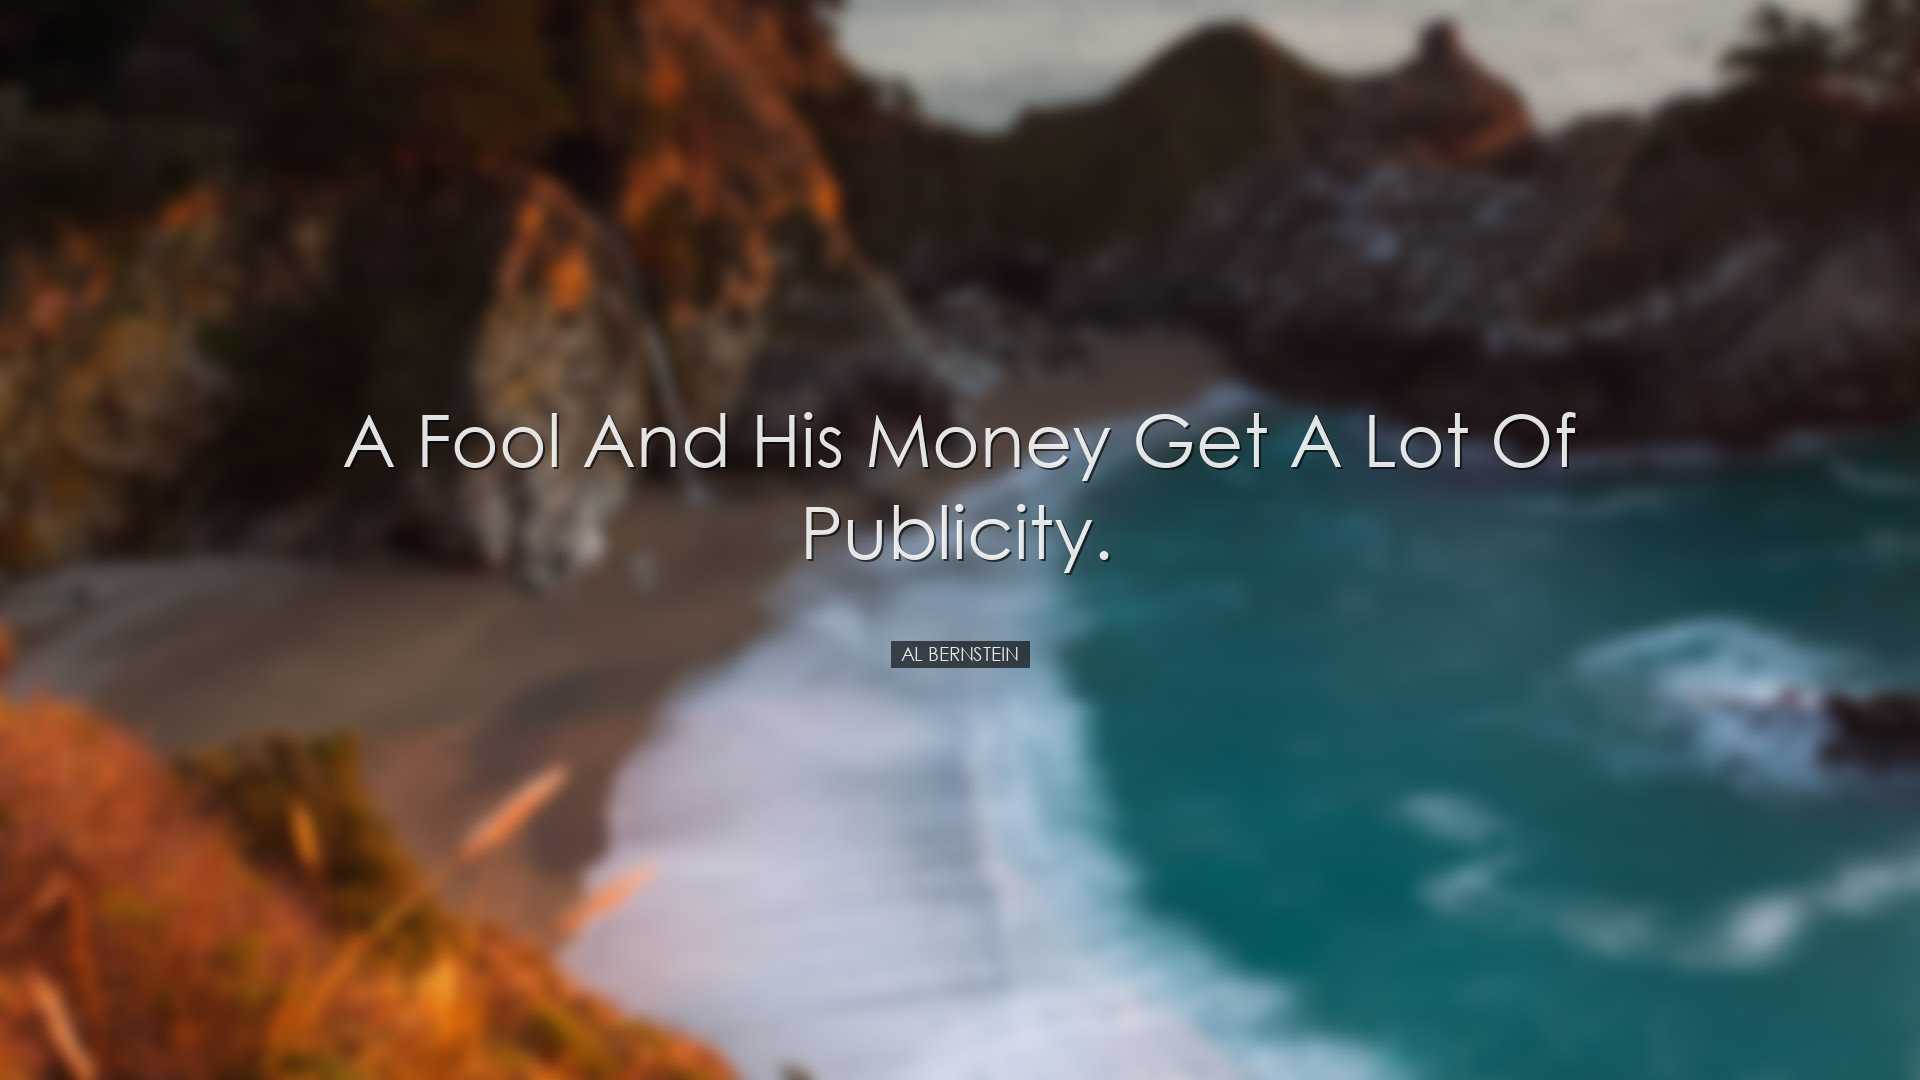 A fool and his money get a lot of publicity. - Al Bernstein